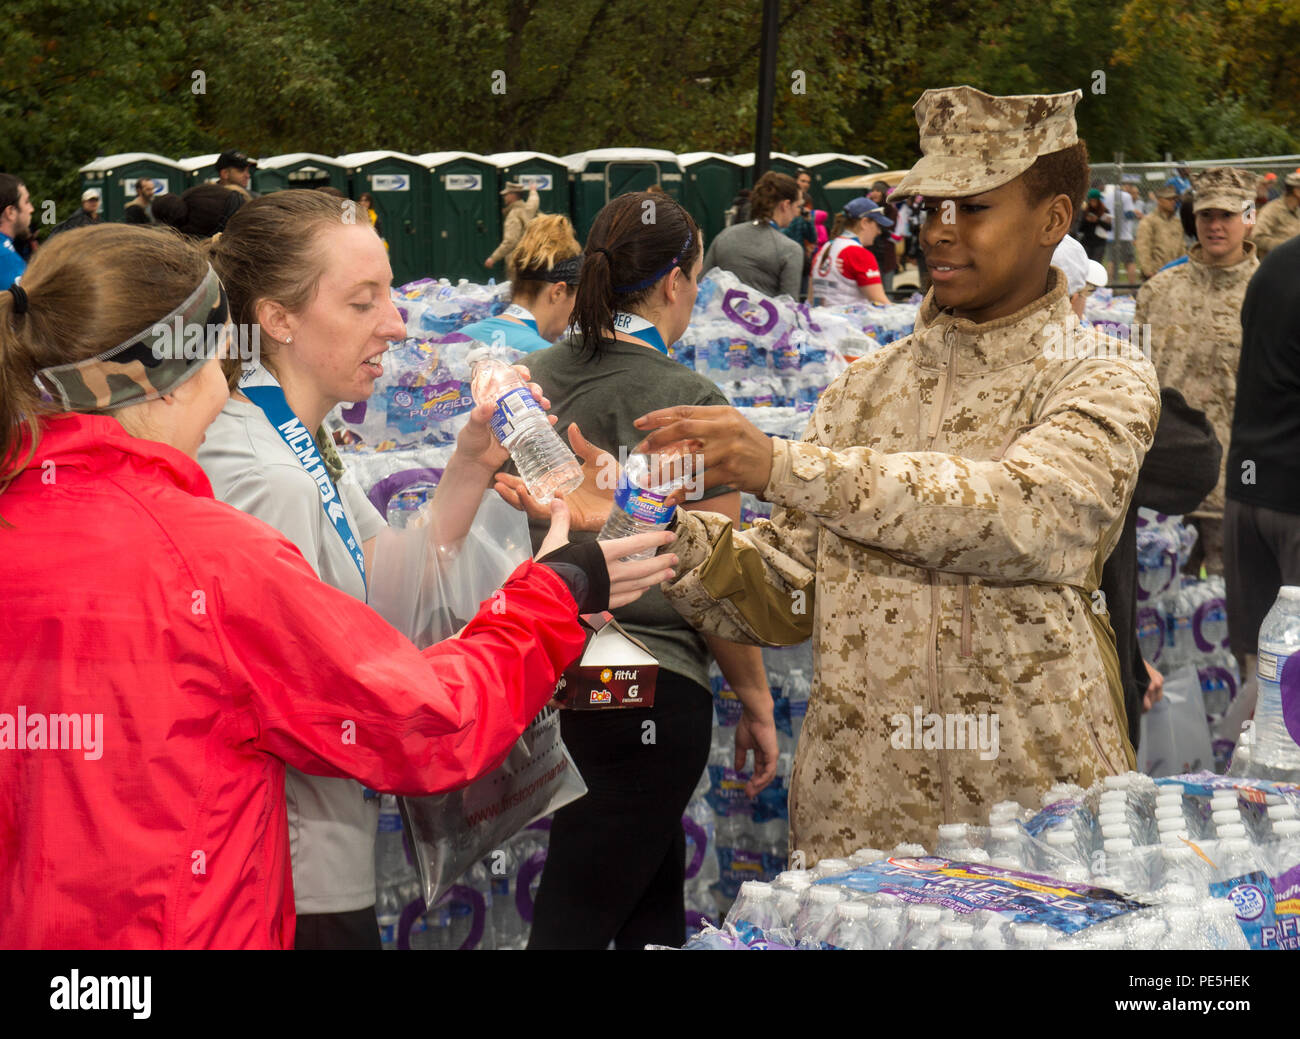 U.S. Marine Corps Pfc. Shekinah L. Peake, student, Defense Information School, Fort George G. Meade, Md., gives water to the finishers of the 10K portion of the 40th Annual Marine Corps Marathon, Arlington, Va., Oct. 25, 2015. Known as 'The People's Marathon,' the 26.2 mile race, rated the third largest marathon in the United States, draws over 30,000 participants annually. (U.S. Marine Corps photo by Lance Cpl. Elisha N. Peake/Released) Stock Photo